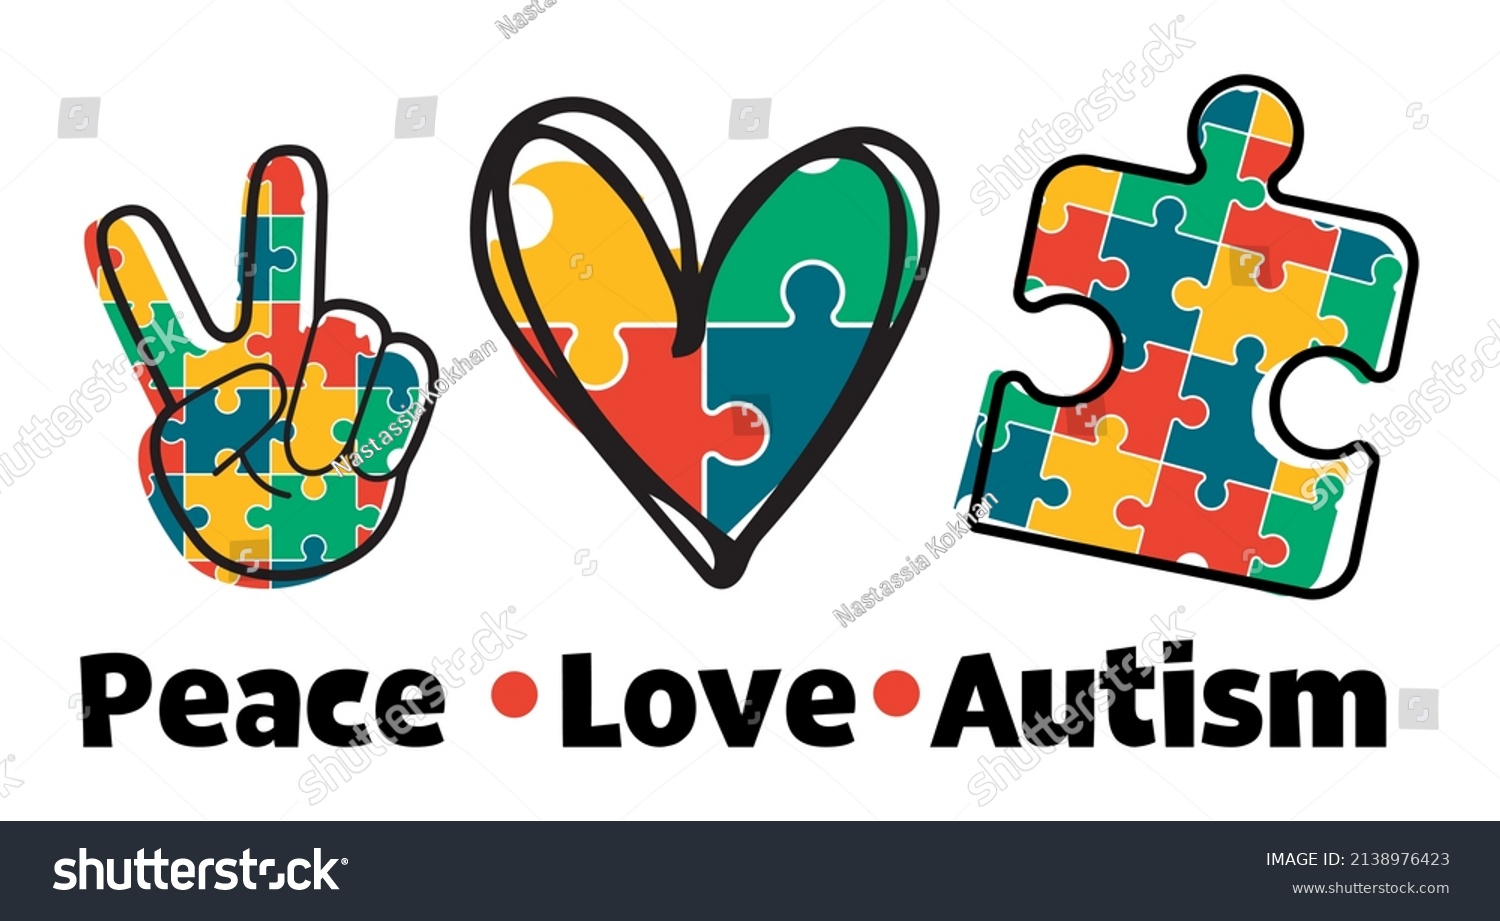 SVG of Peace Love Autism svg vector Illustration isolated on white background. Autism shirt design with Puzzle Piece svg